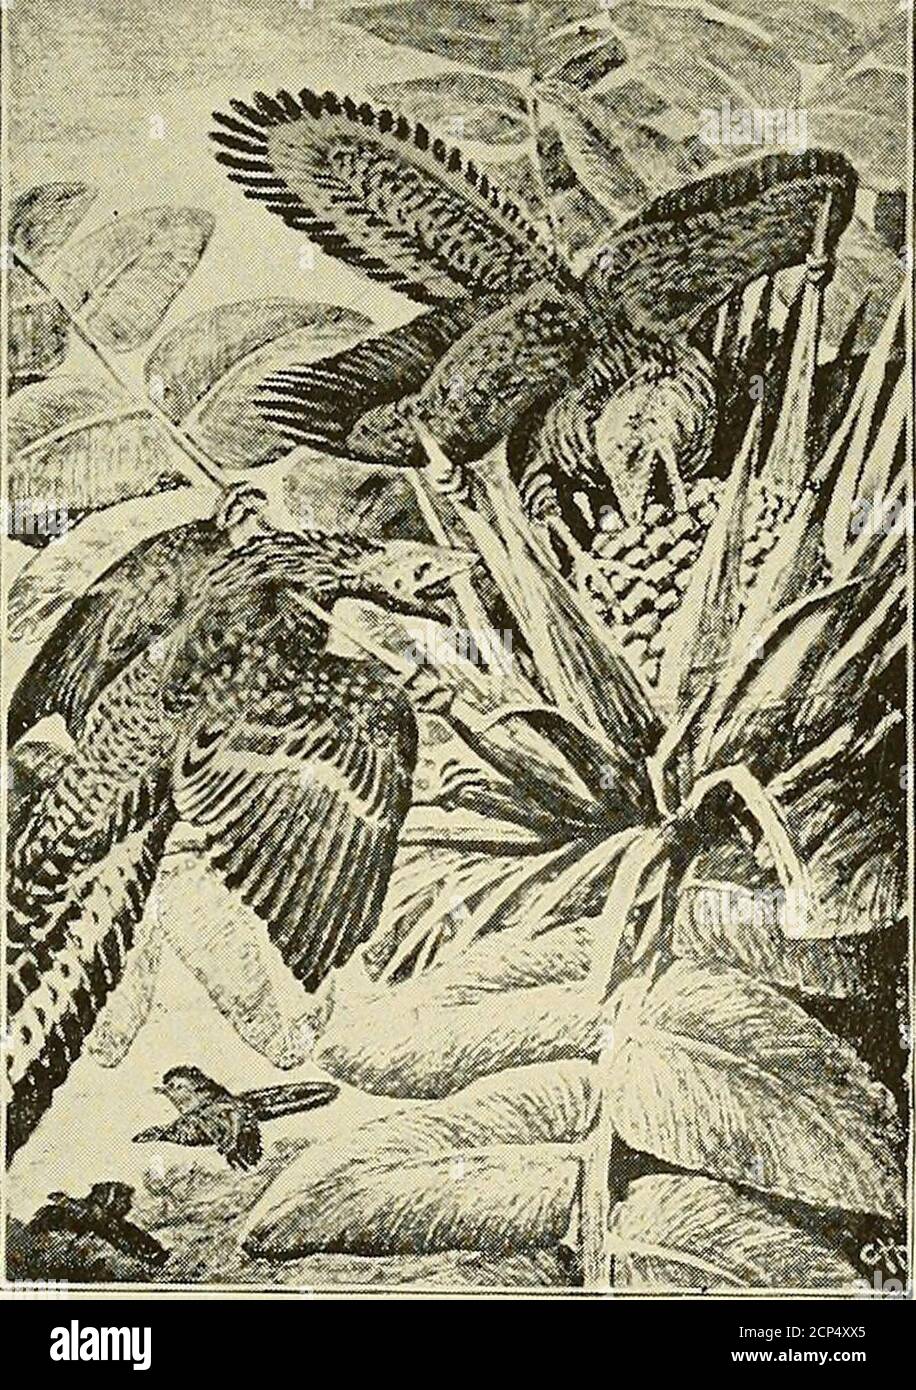 . The Oölogist: for the student of birds, their nests and eggs . Archaeopteryx macrura (lithographica)V. Meyer, from Zittel.. Heilmans Restoration of Archaeopteryx macrura,from Lull. 7a THE OOLOGIST 3. A. S. Woodward; Vertibrate Pa-laeontology, Cambridge UniversityPress, 1898. 4. Karl A. von Zittel: Text-book ofPalaeontology, vol. II, Macmillanand Co., (London), 1902. Past two years I have been gamewarden on the Adirondack LeagueClub Preserve—a bird sanctuary of100,000 acres in the Moose River andWest Canada Creek Country. The private park is used to propa-gate and protect fish, birds, and qua Stock Photo